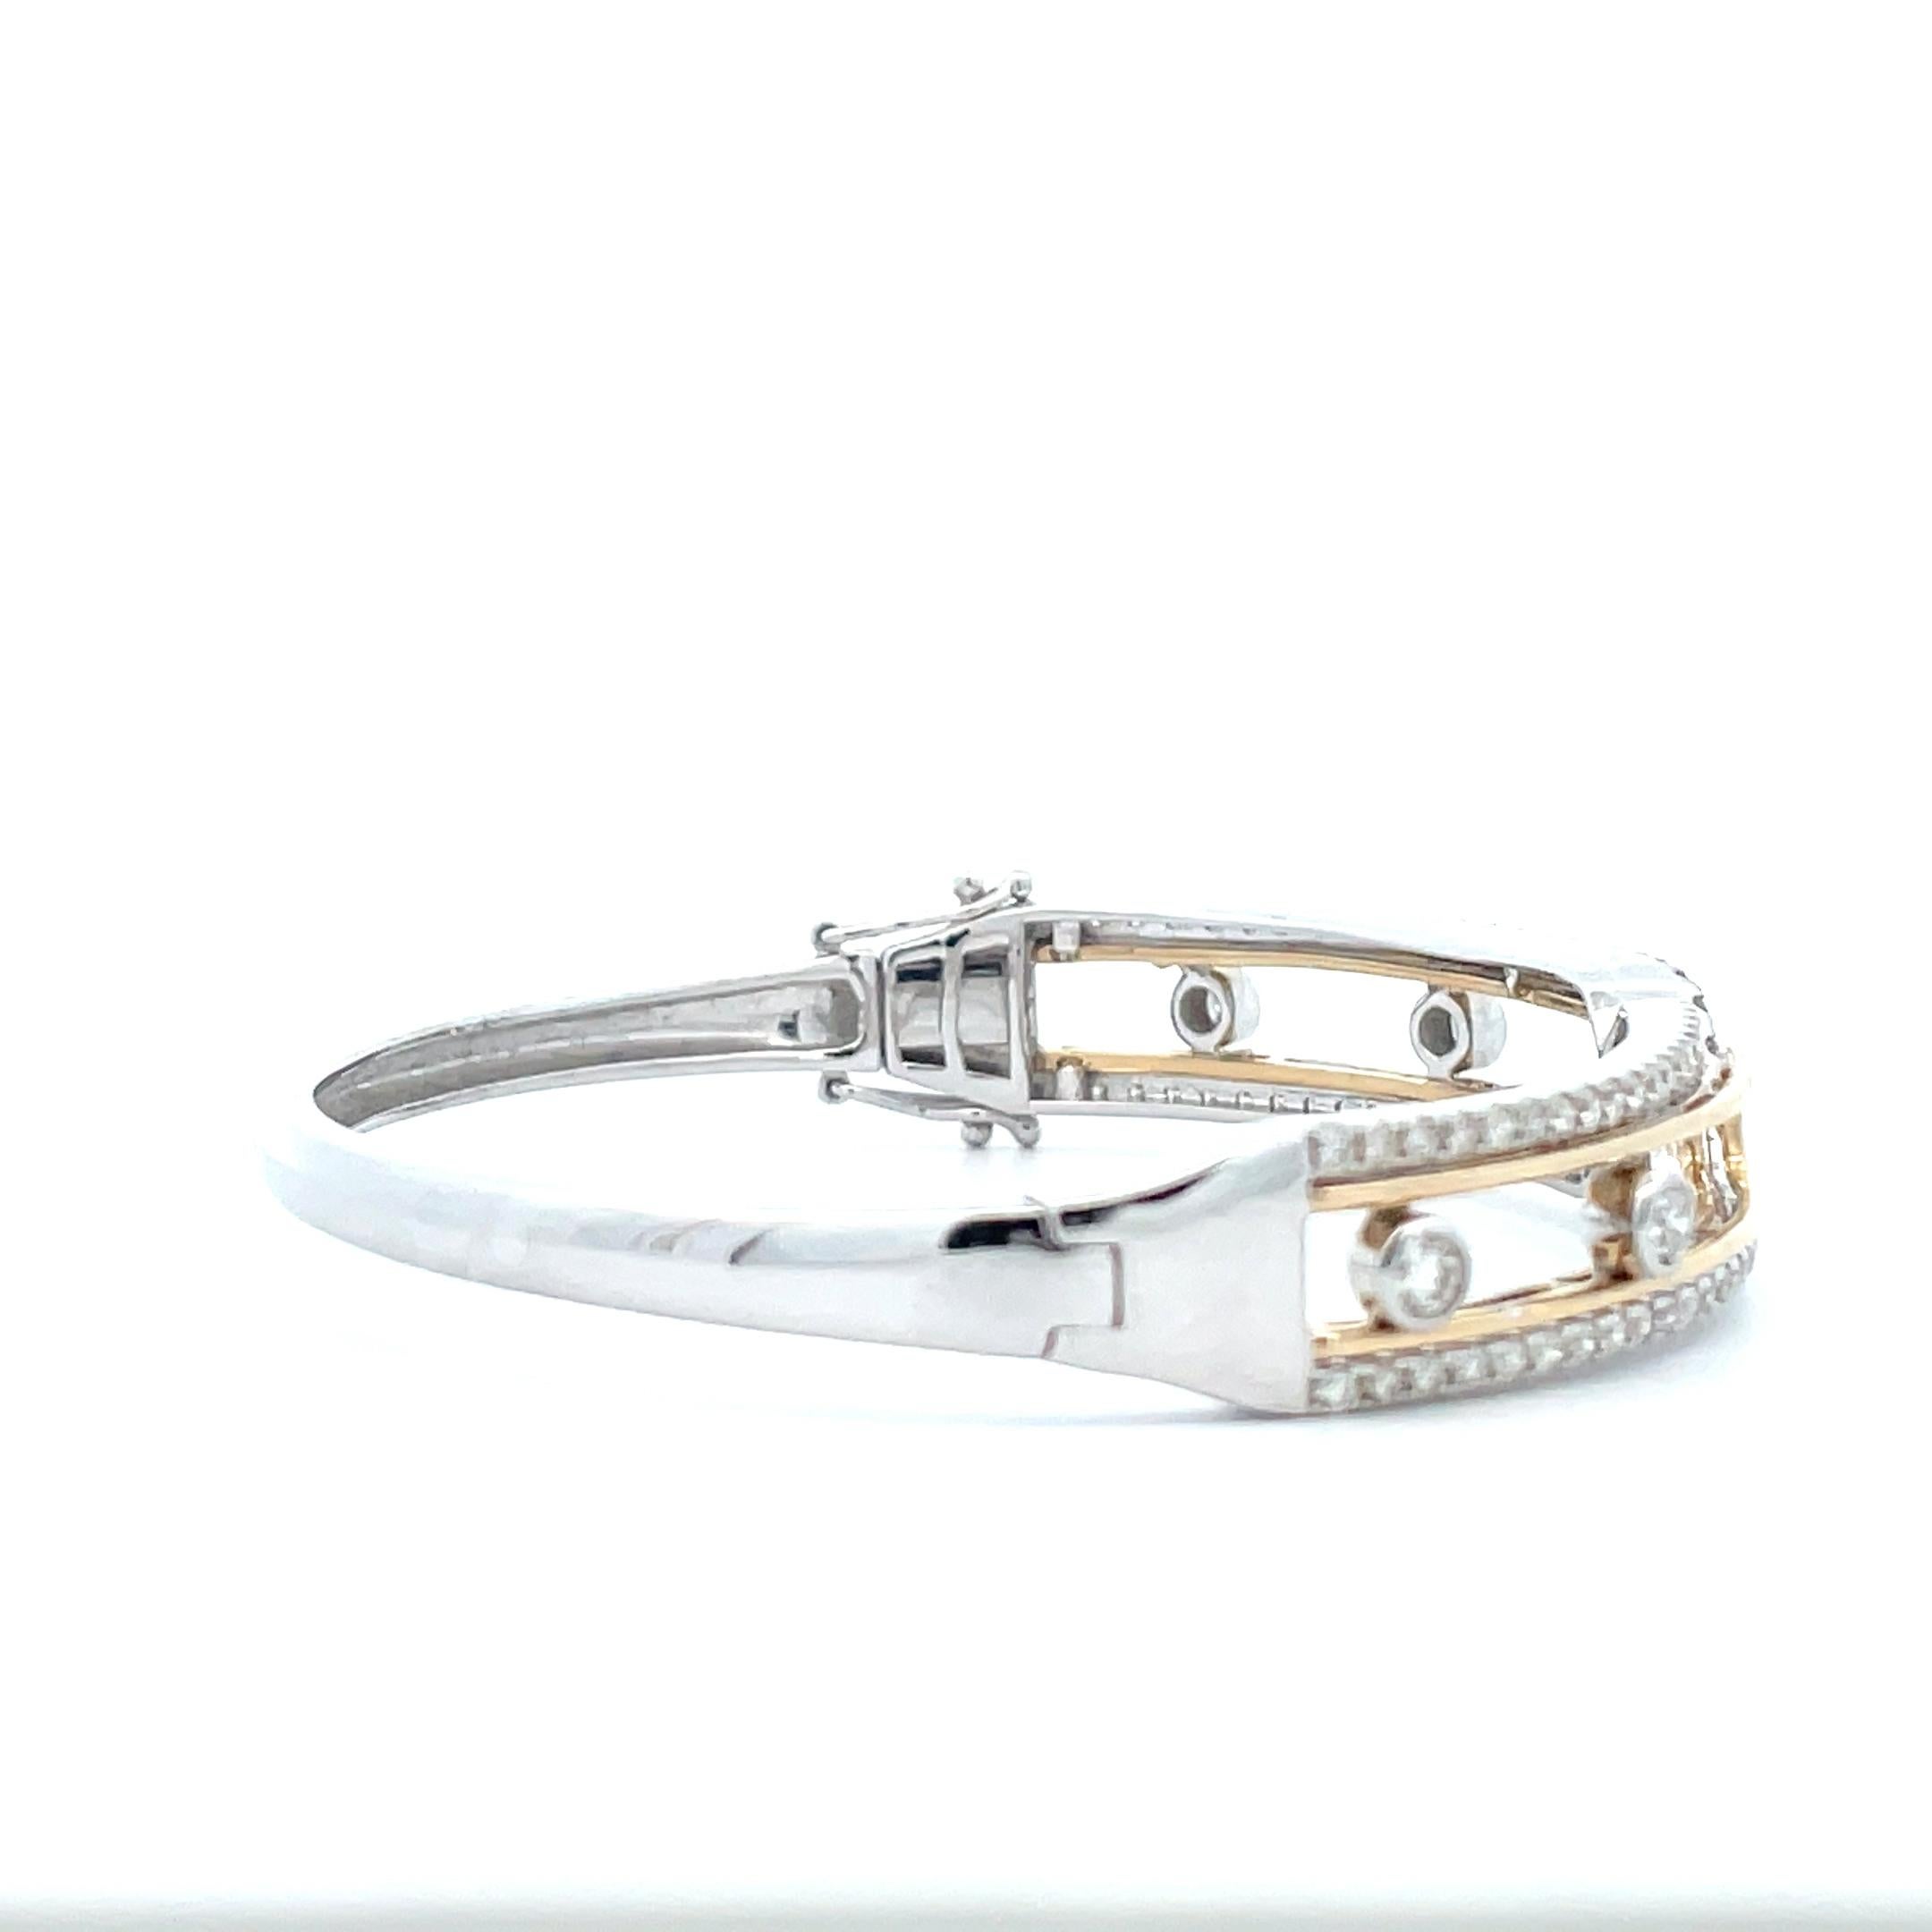 Our floating diamond bangles are handcrafted in 14K solid gold, featuring a criss-cross design with diamonds that slide from one side to another. Our 14k solid gold diamond bangles feature a secure locking mechanism which keeps the diamonds in